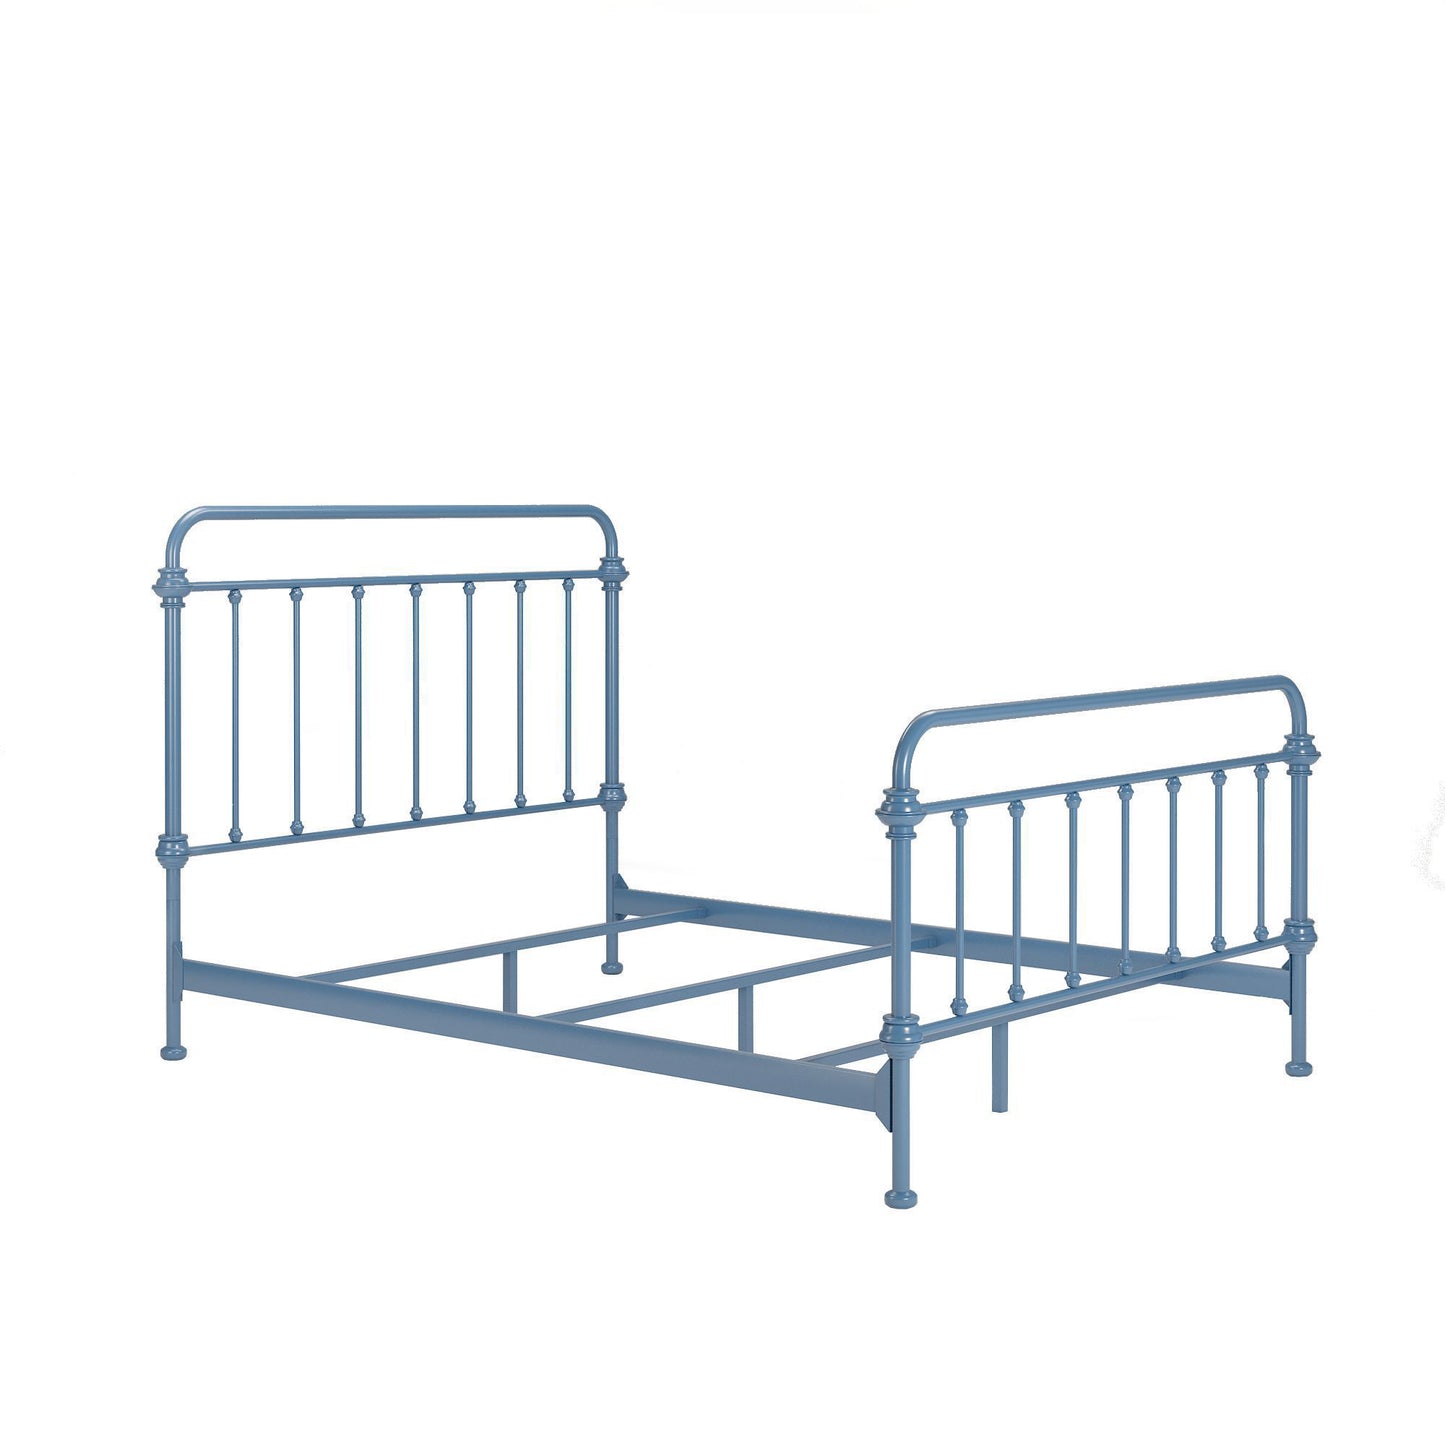 Antique Graceful Victorian Iron Metal Bed - Blue Steel, Full (Full Size)